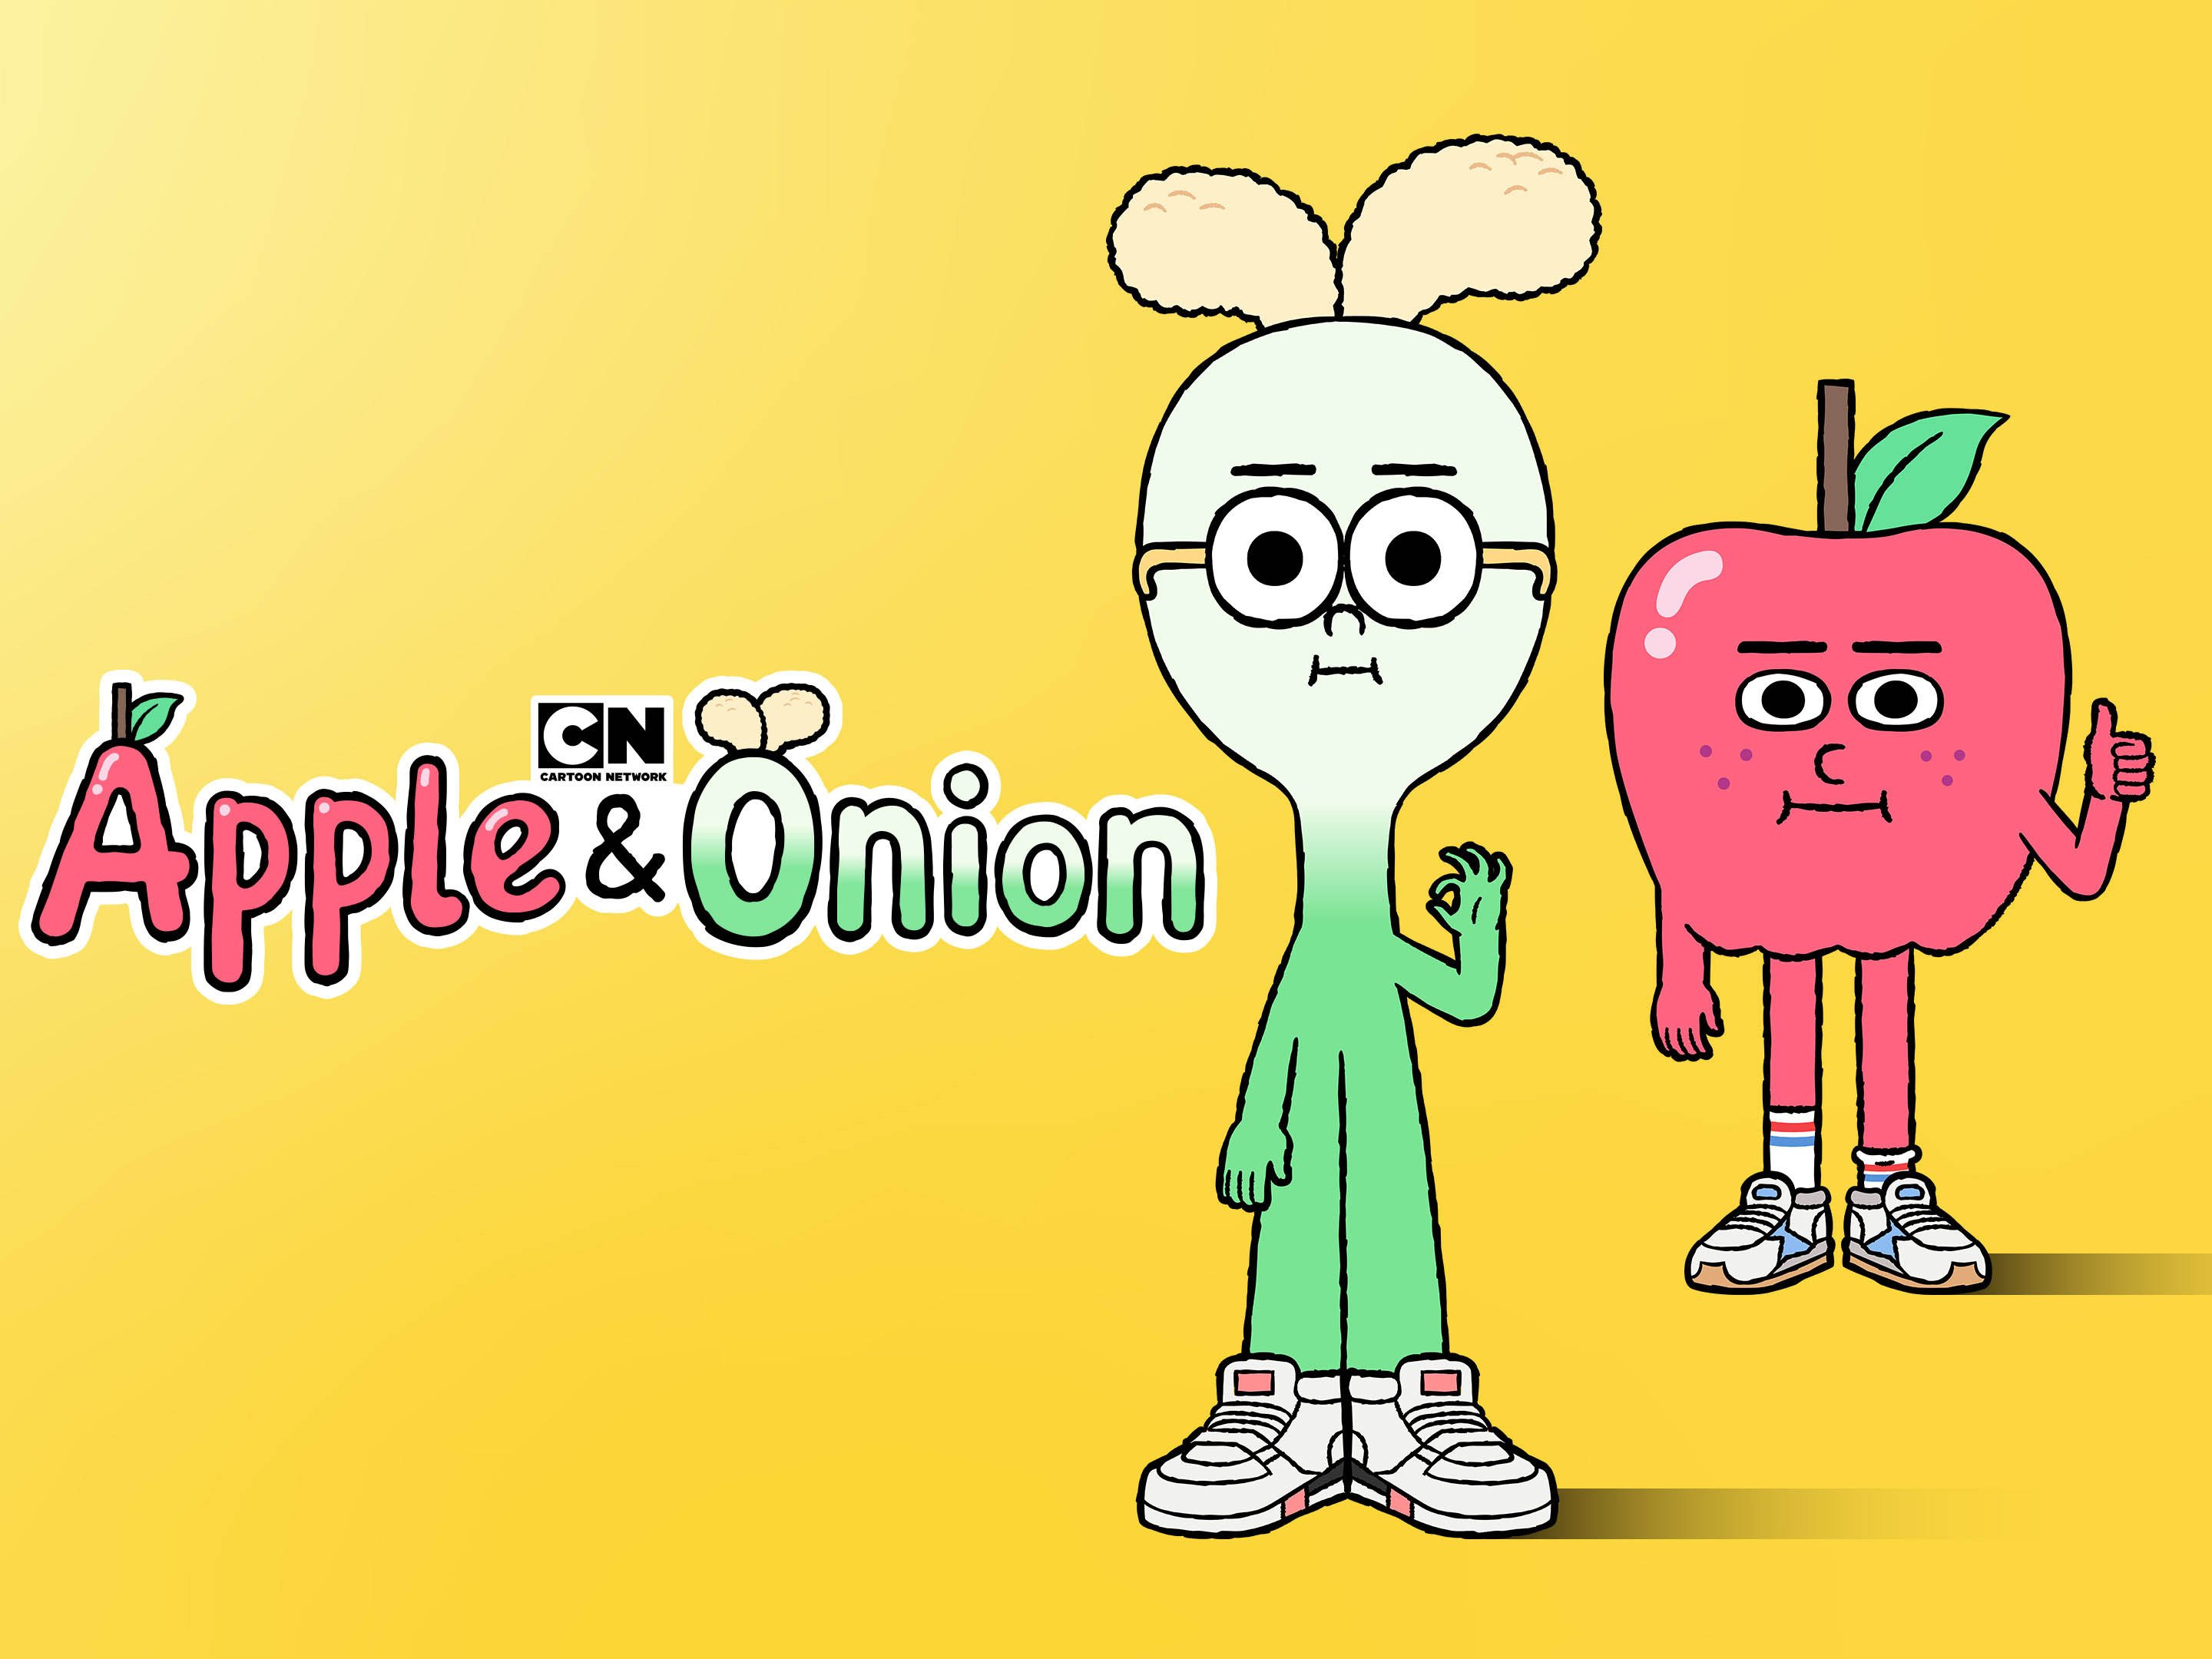 An animated green onion with tennis shoes and glasses is standing next to an animated apple in tennis shoes. Beside them are the words "Apple & Onion". 